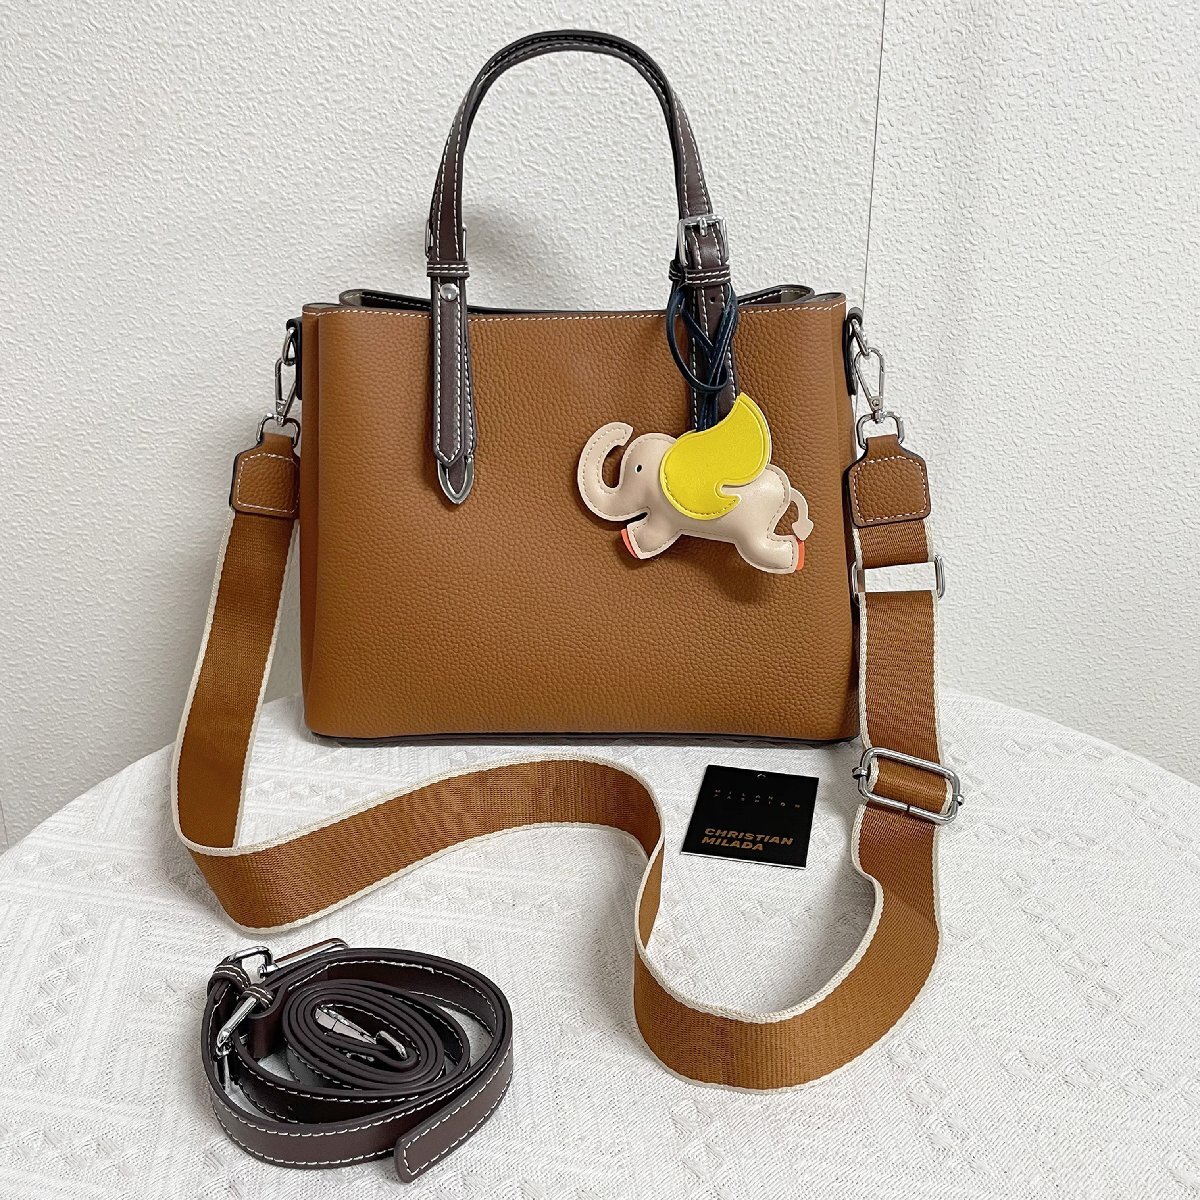  top class EU made regular price 11 ten thousand *christian milada* milano departure * handbag * fine quality cow leather leather original leather tote bag shoulder charm attaching lady's 